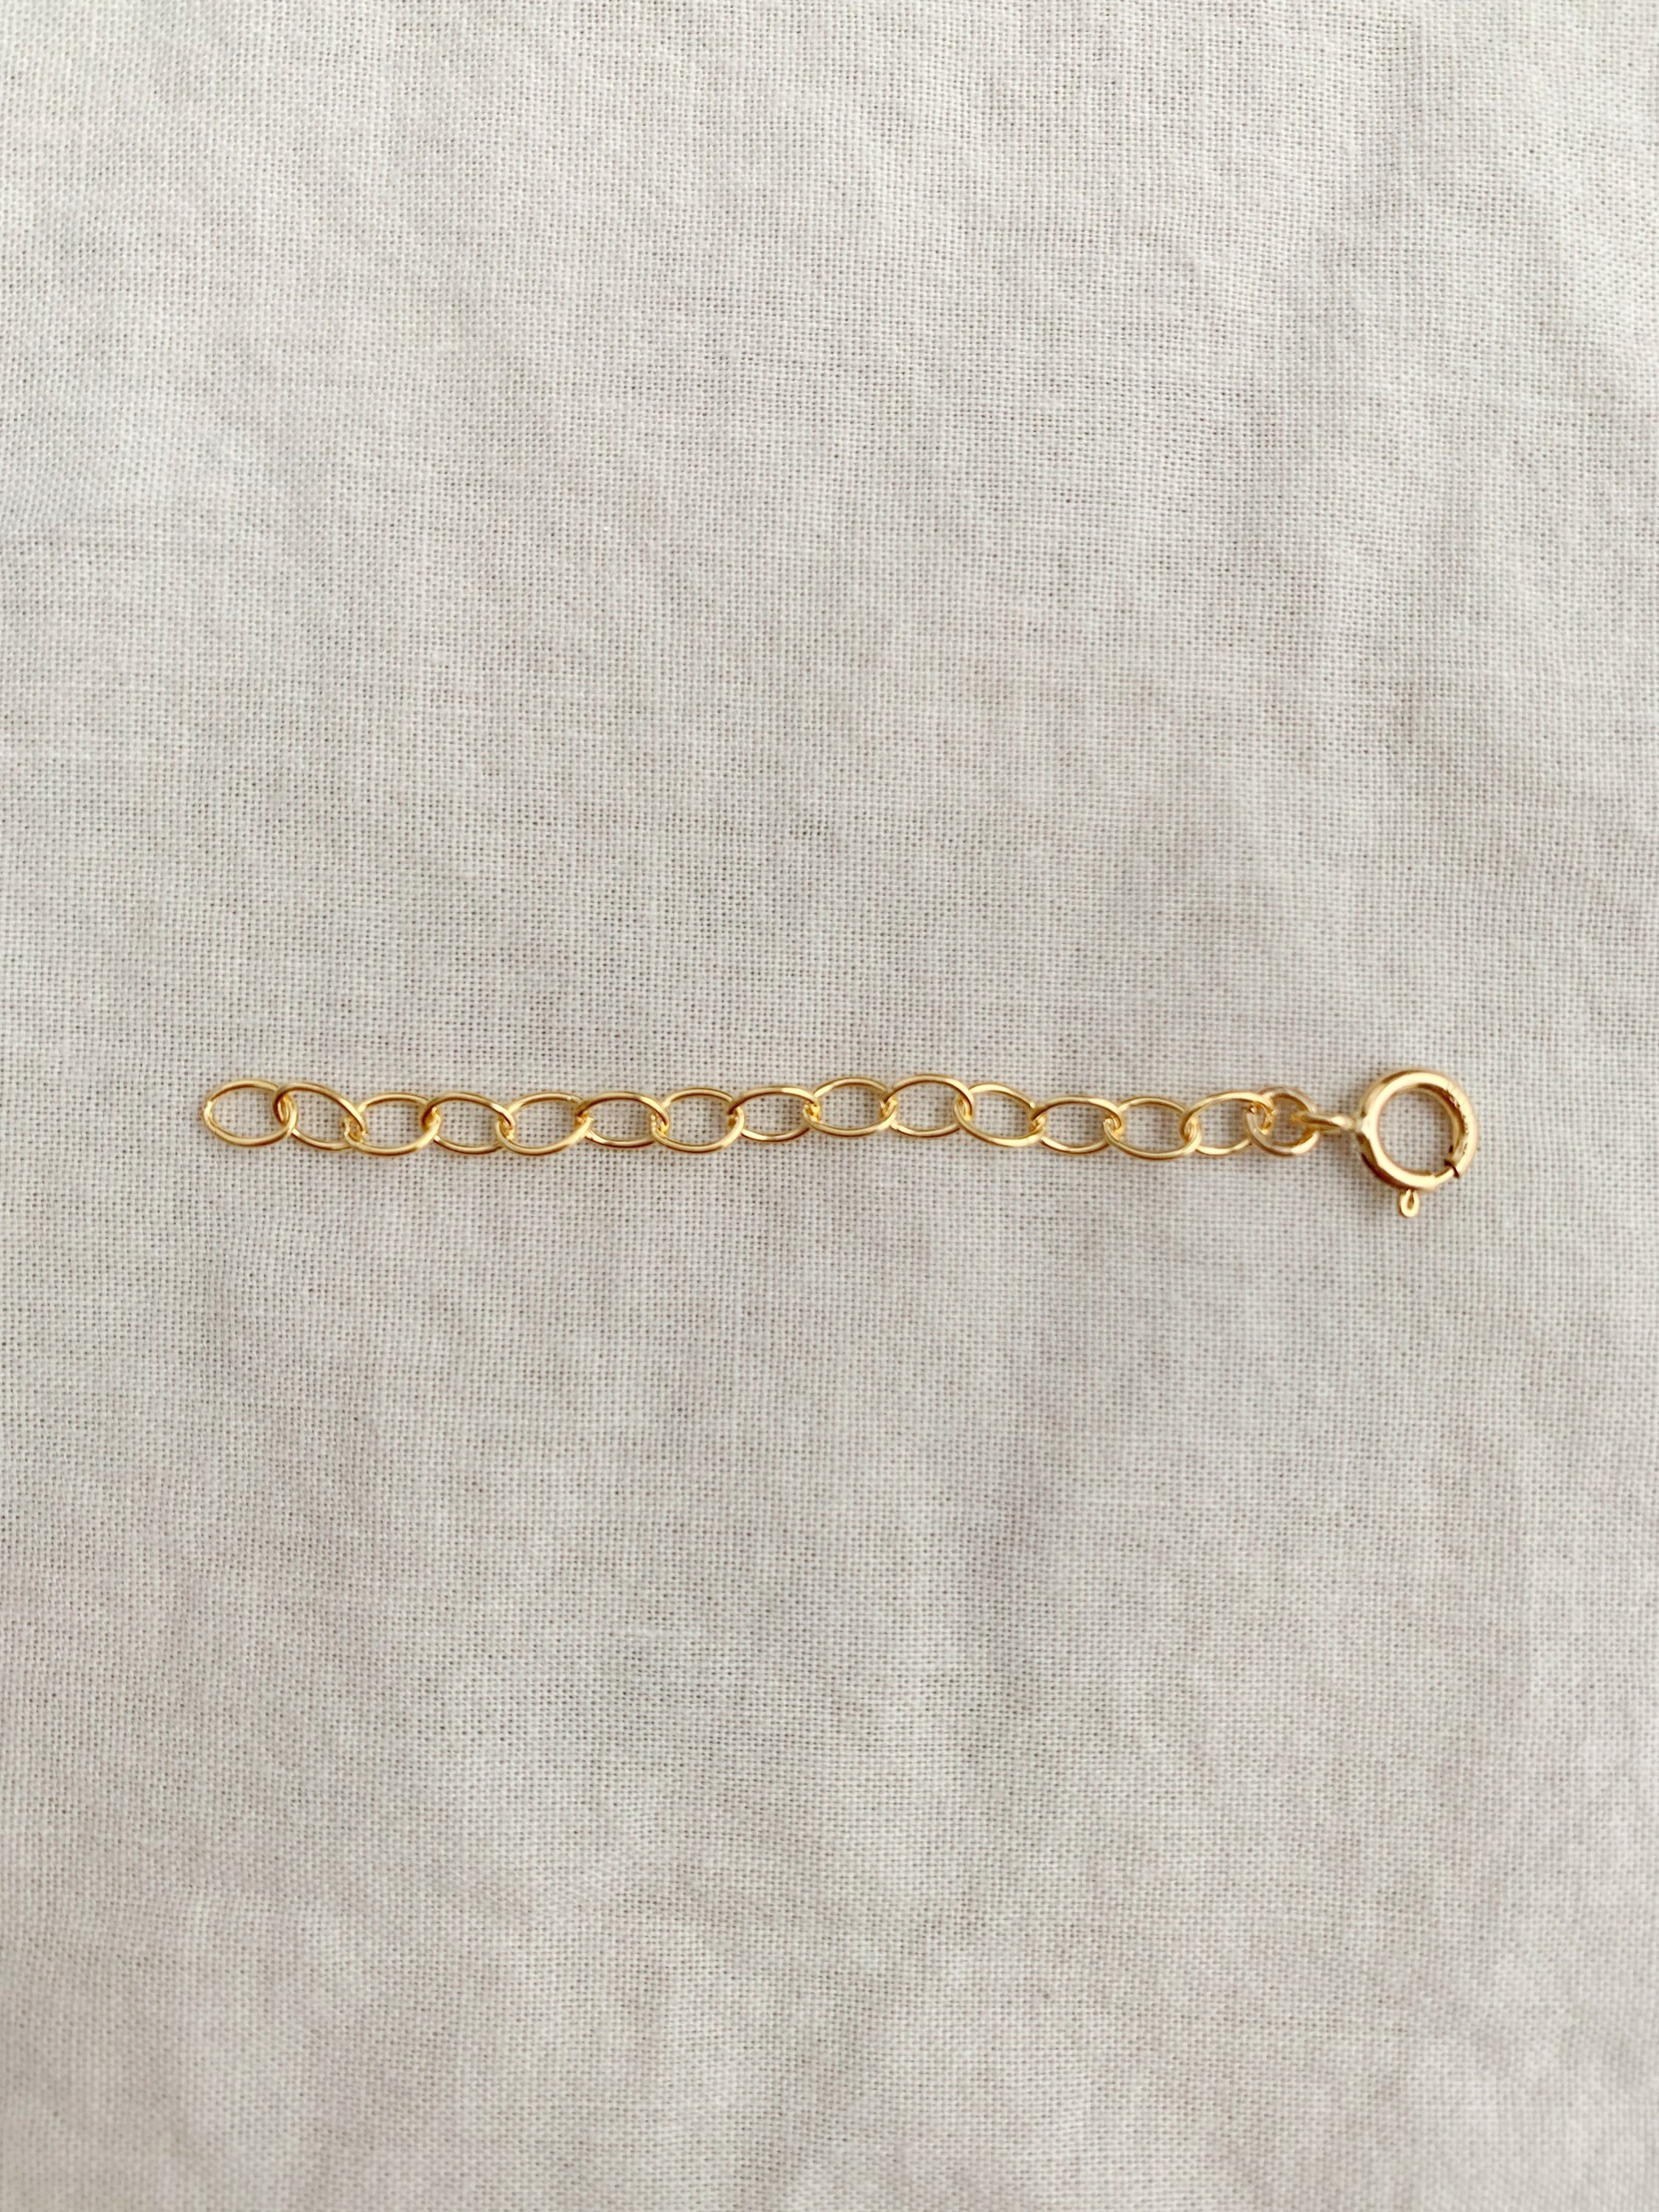 14K Gold Extender Chain, Necklace Bracelet 1 to 3 Extender, Adjustable Gold  Extender Link, Spring Ring Clasp, Jewelry Chain Extender 